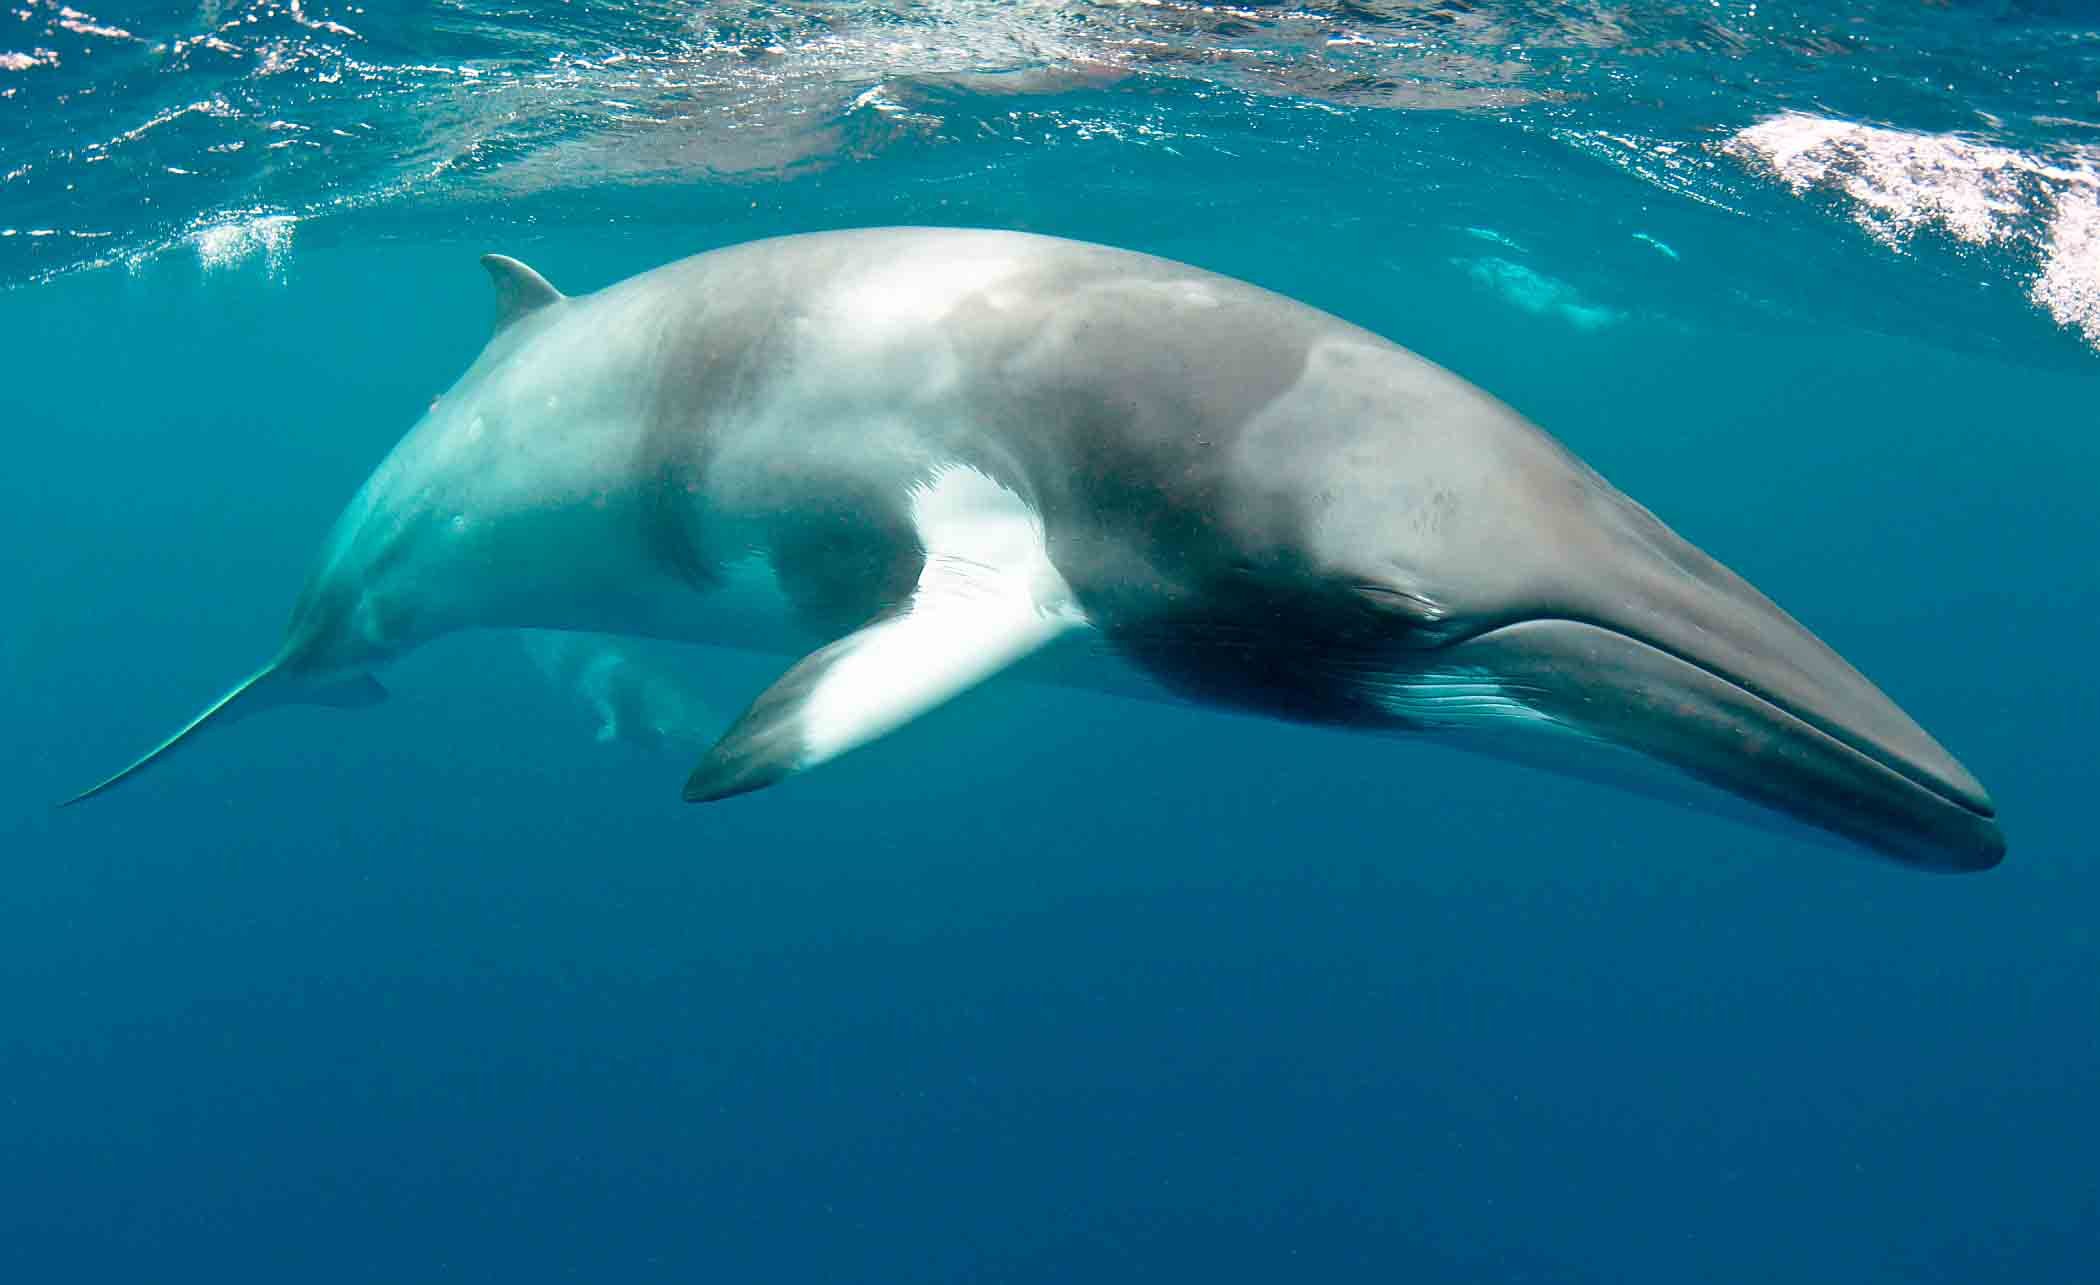 A googled image of a Minke whale. These are 20-30 feet long and very common ( and lame ) to see. You only see a bit of their back before they dive back down. 